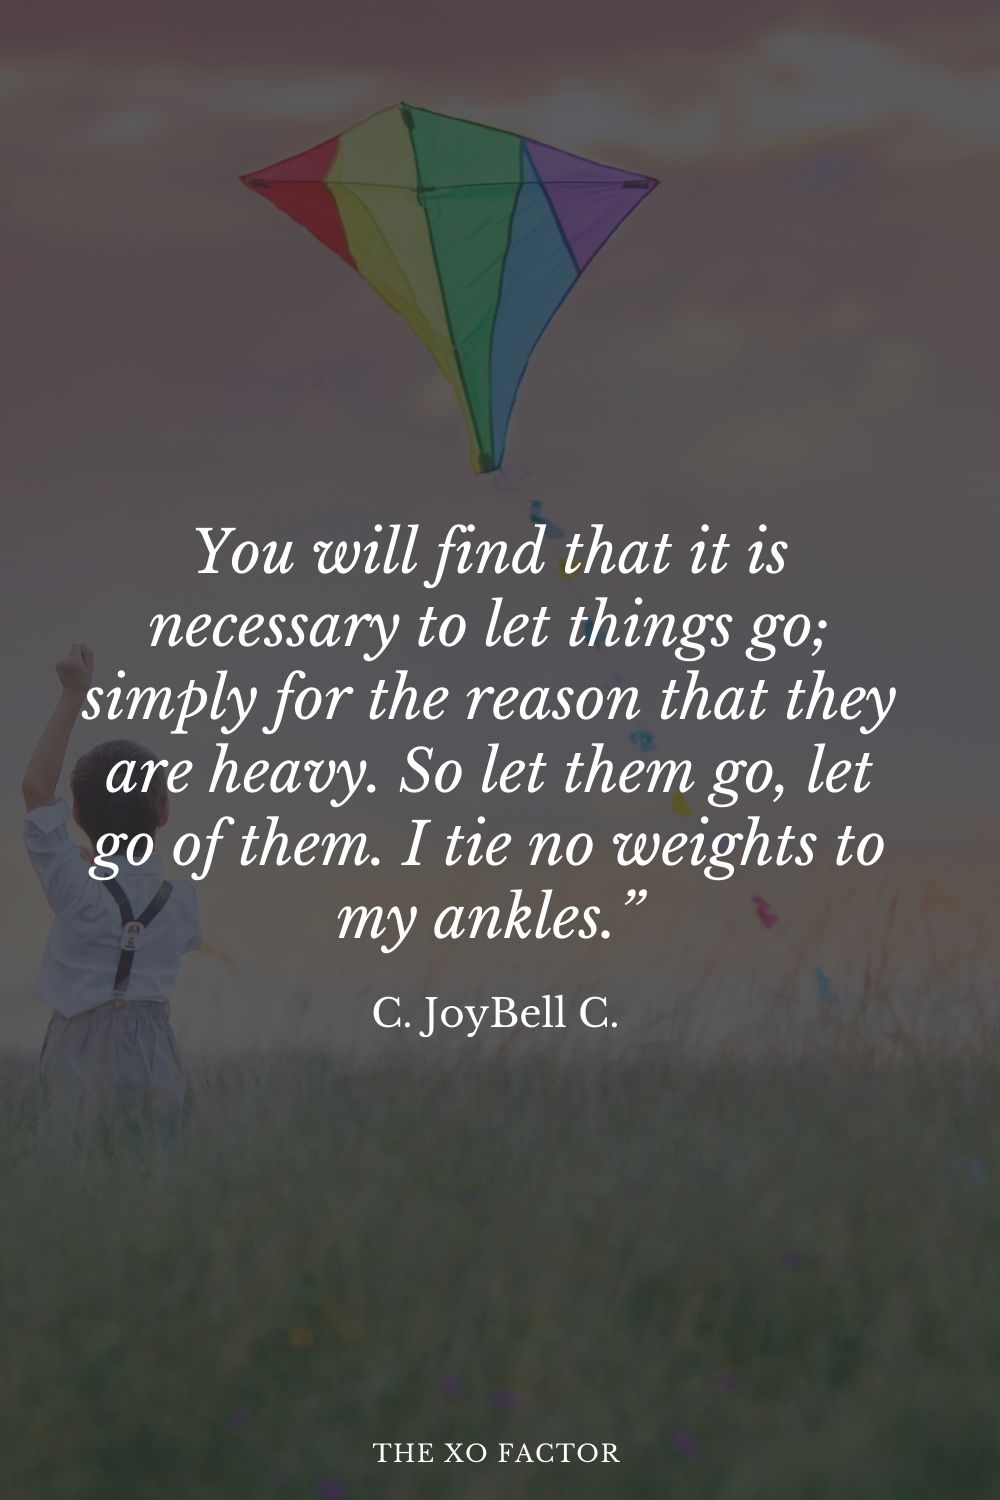 You will find that it is necessary to let things go; simply for the reason that they are heavy. So let them go, let go of them. I tie no weights to my ankles.” C. JoyBell C.